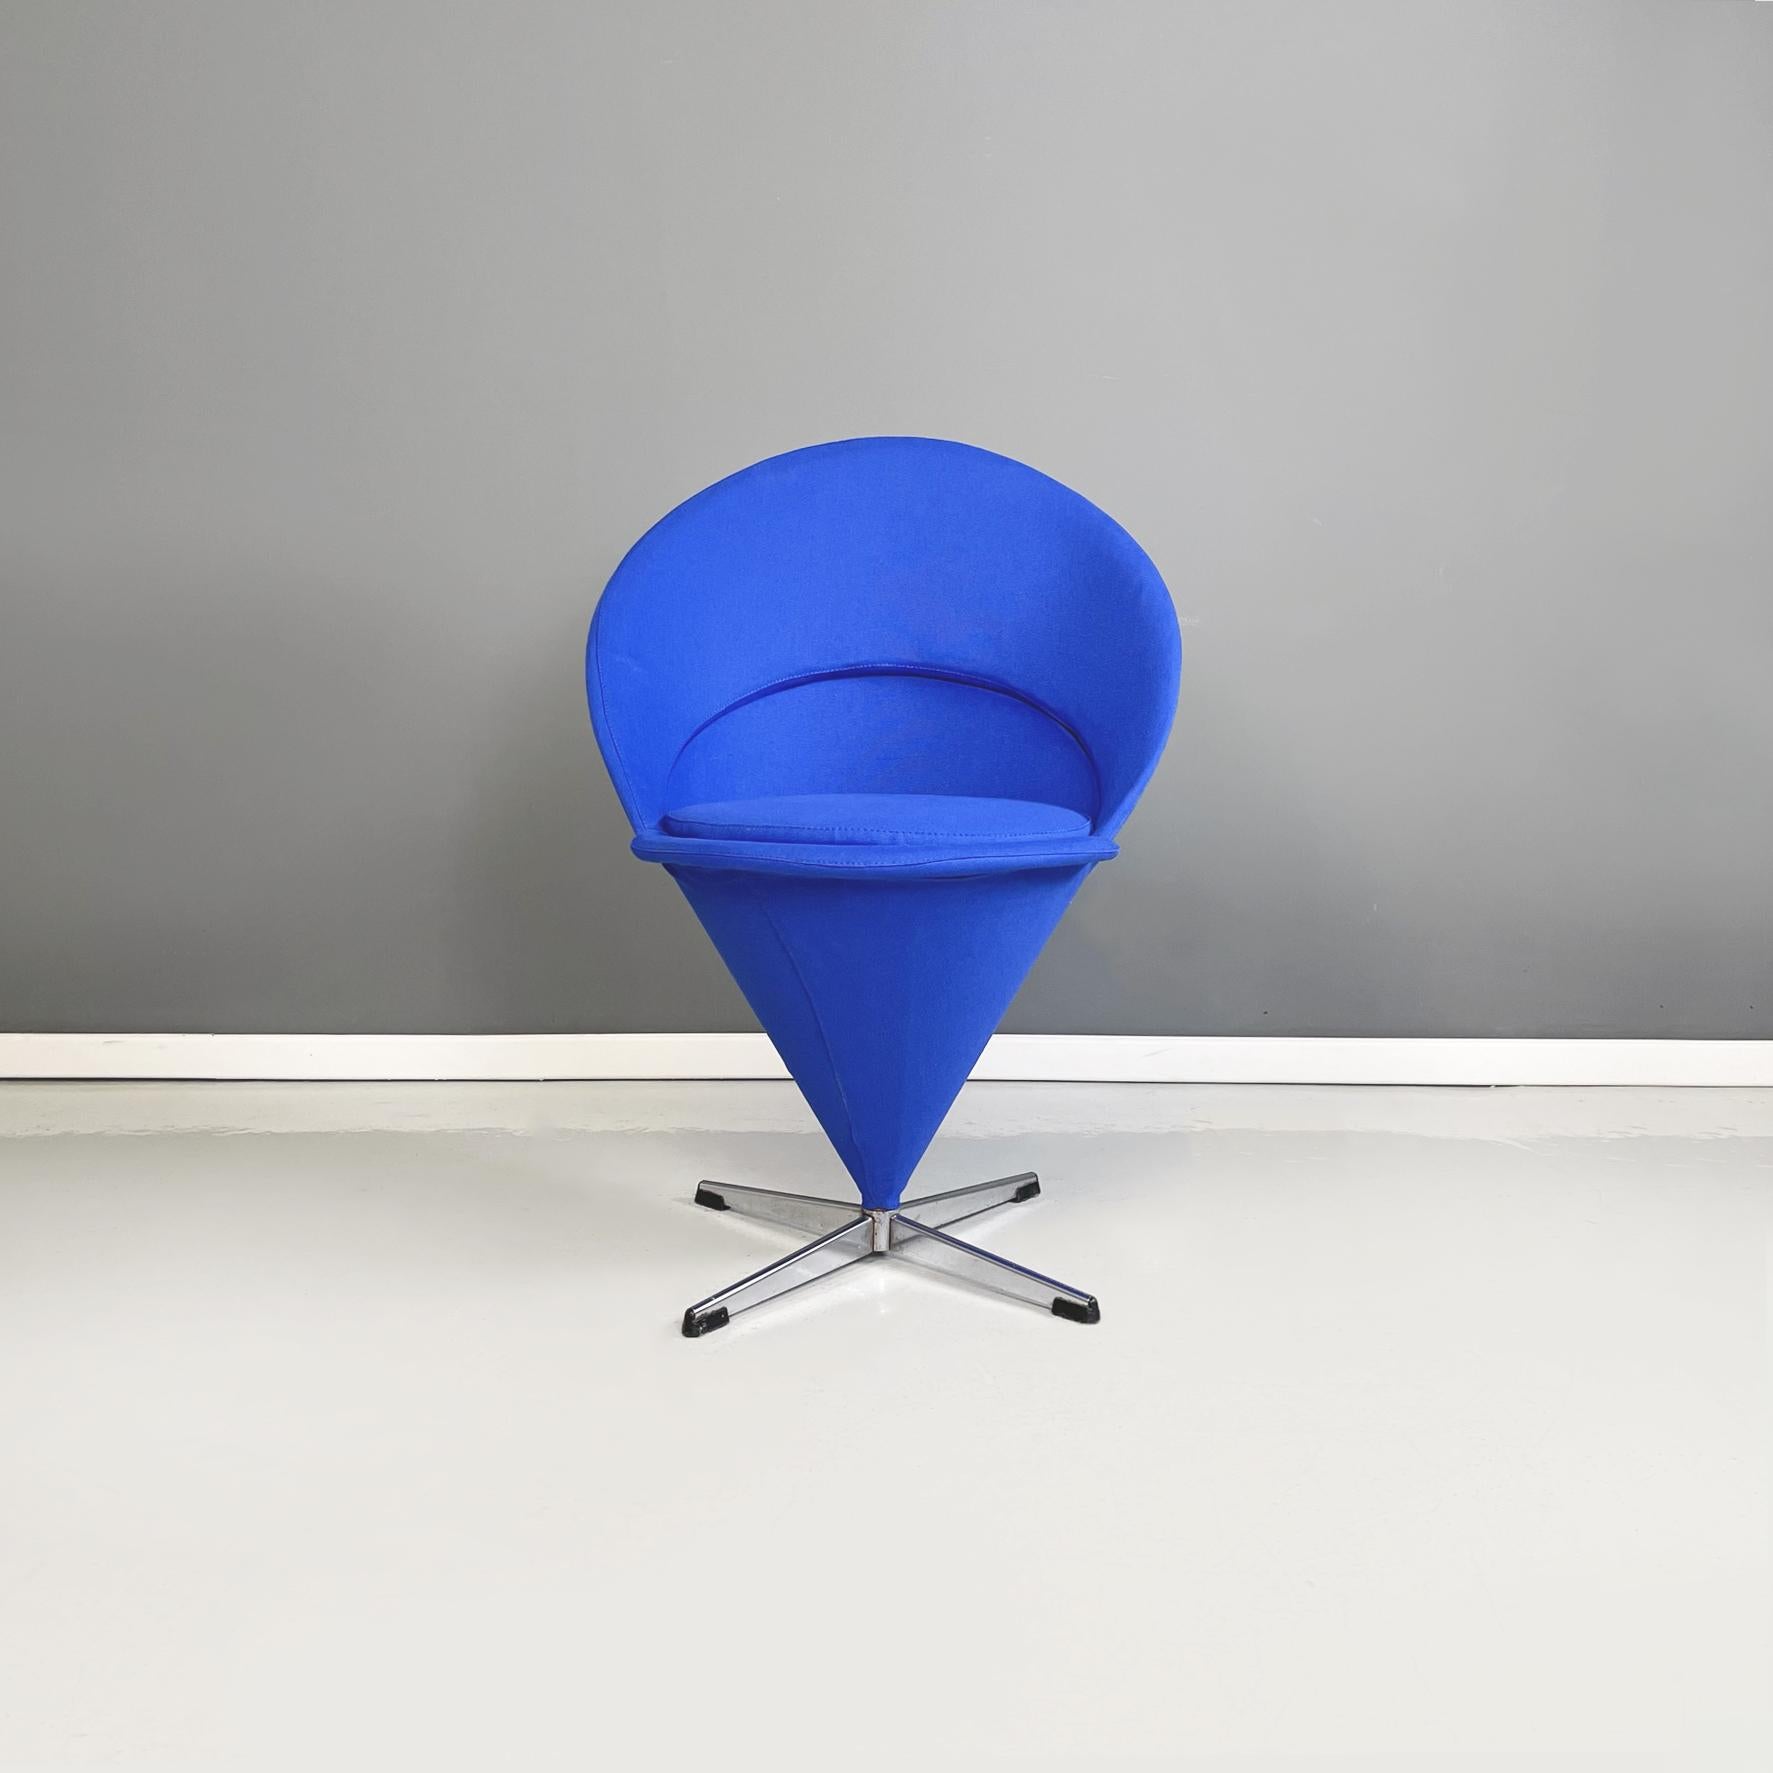 Italian midcentury Swivel armchair Cone Chair by Verner Panton for Vitra, 1958
Swivel armchair mod. Cone Chair fully upholstered in electric blue cotton fabric. The structure is made up of a conical-shaped padded seat, whose shell extends upwards,